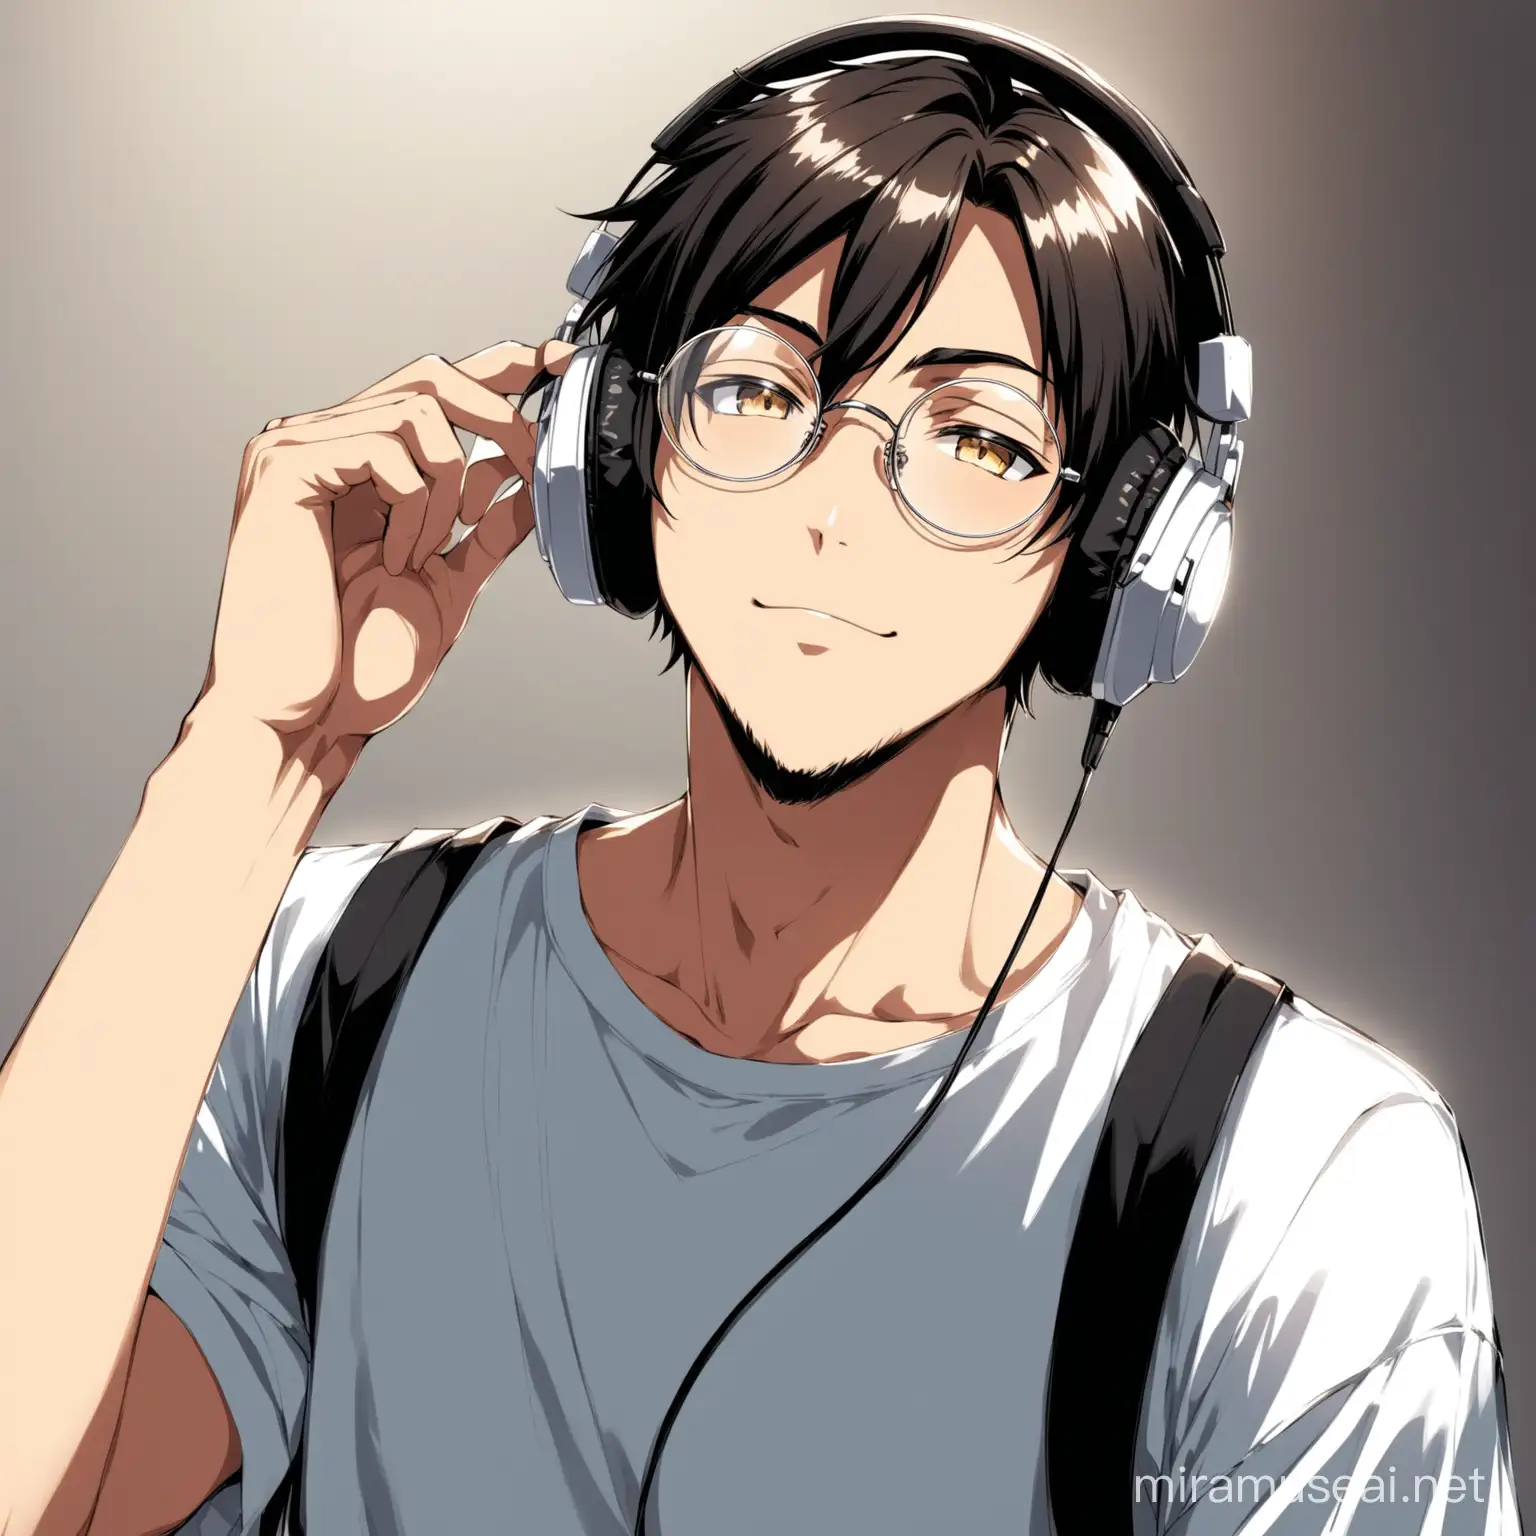 anime guy wearing round glasses and headphones